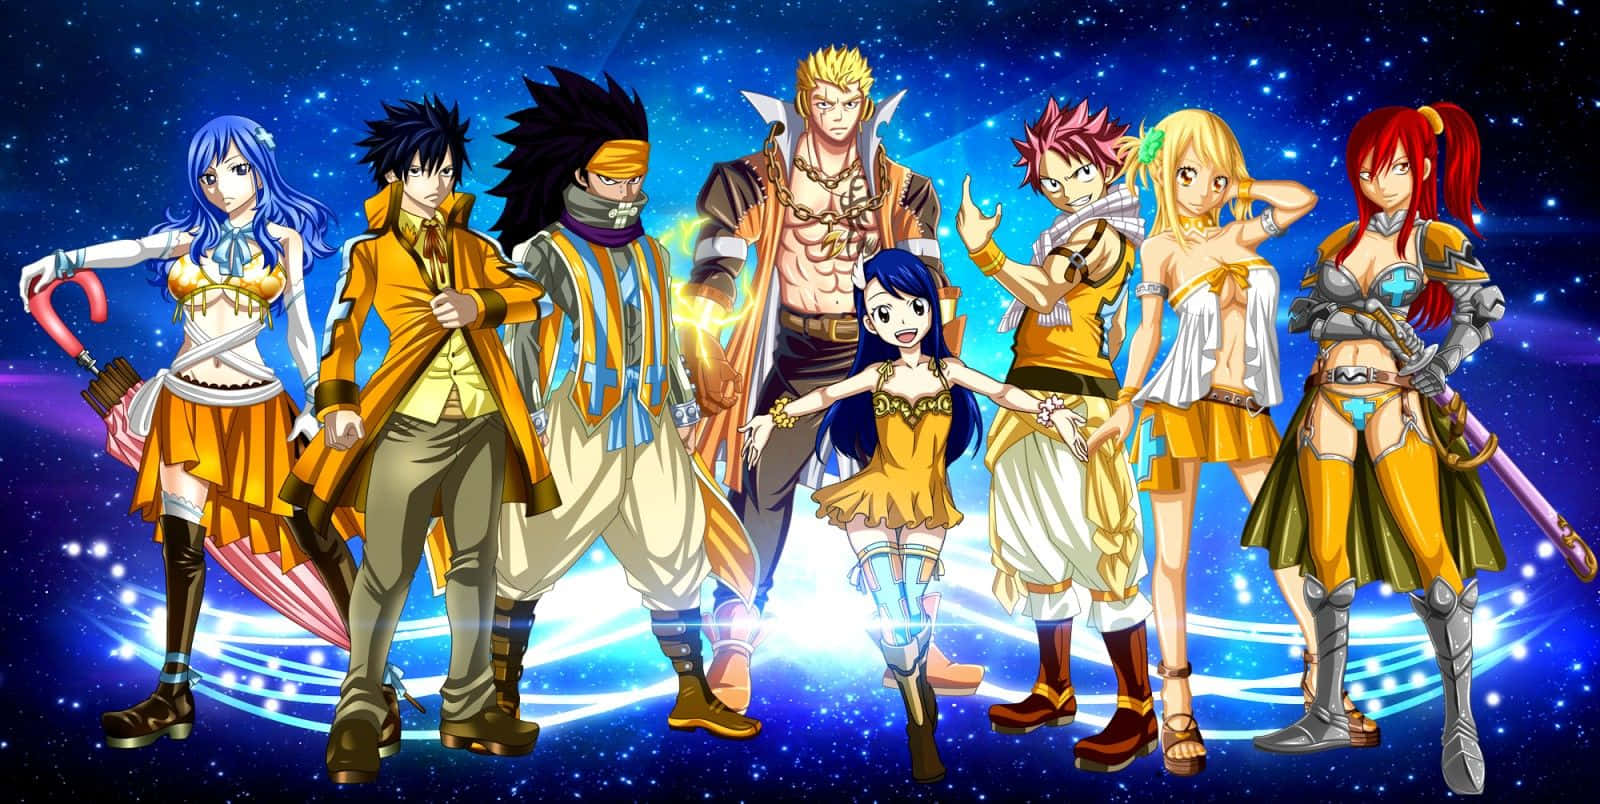 “Unleash the power of Fairy Tail!”